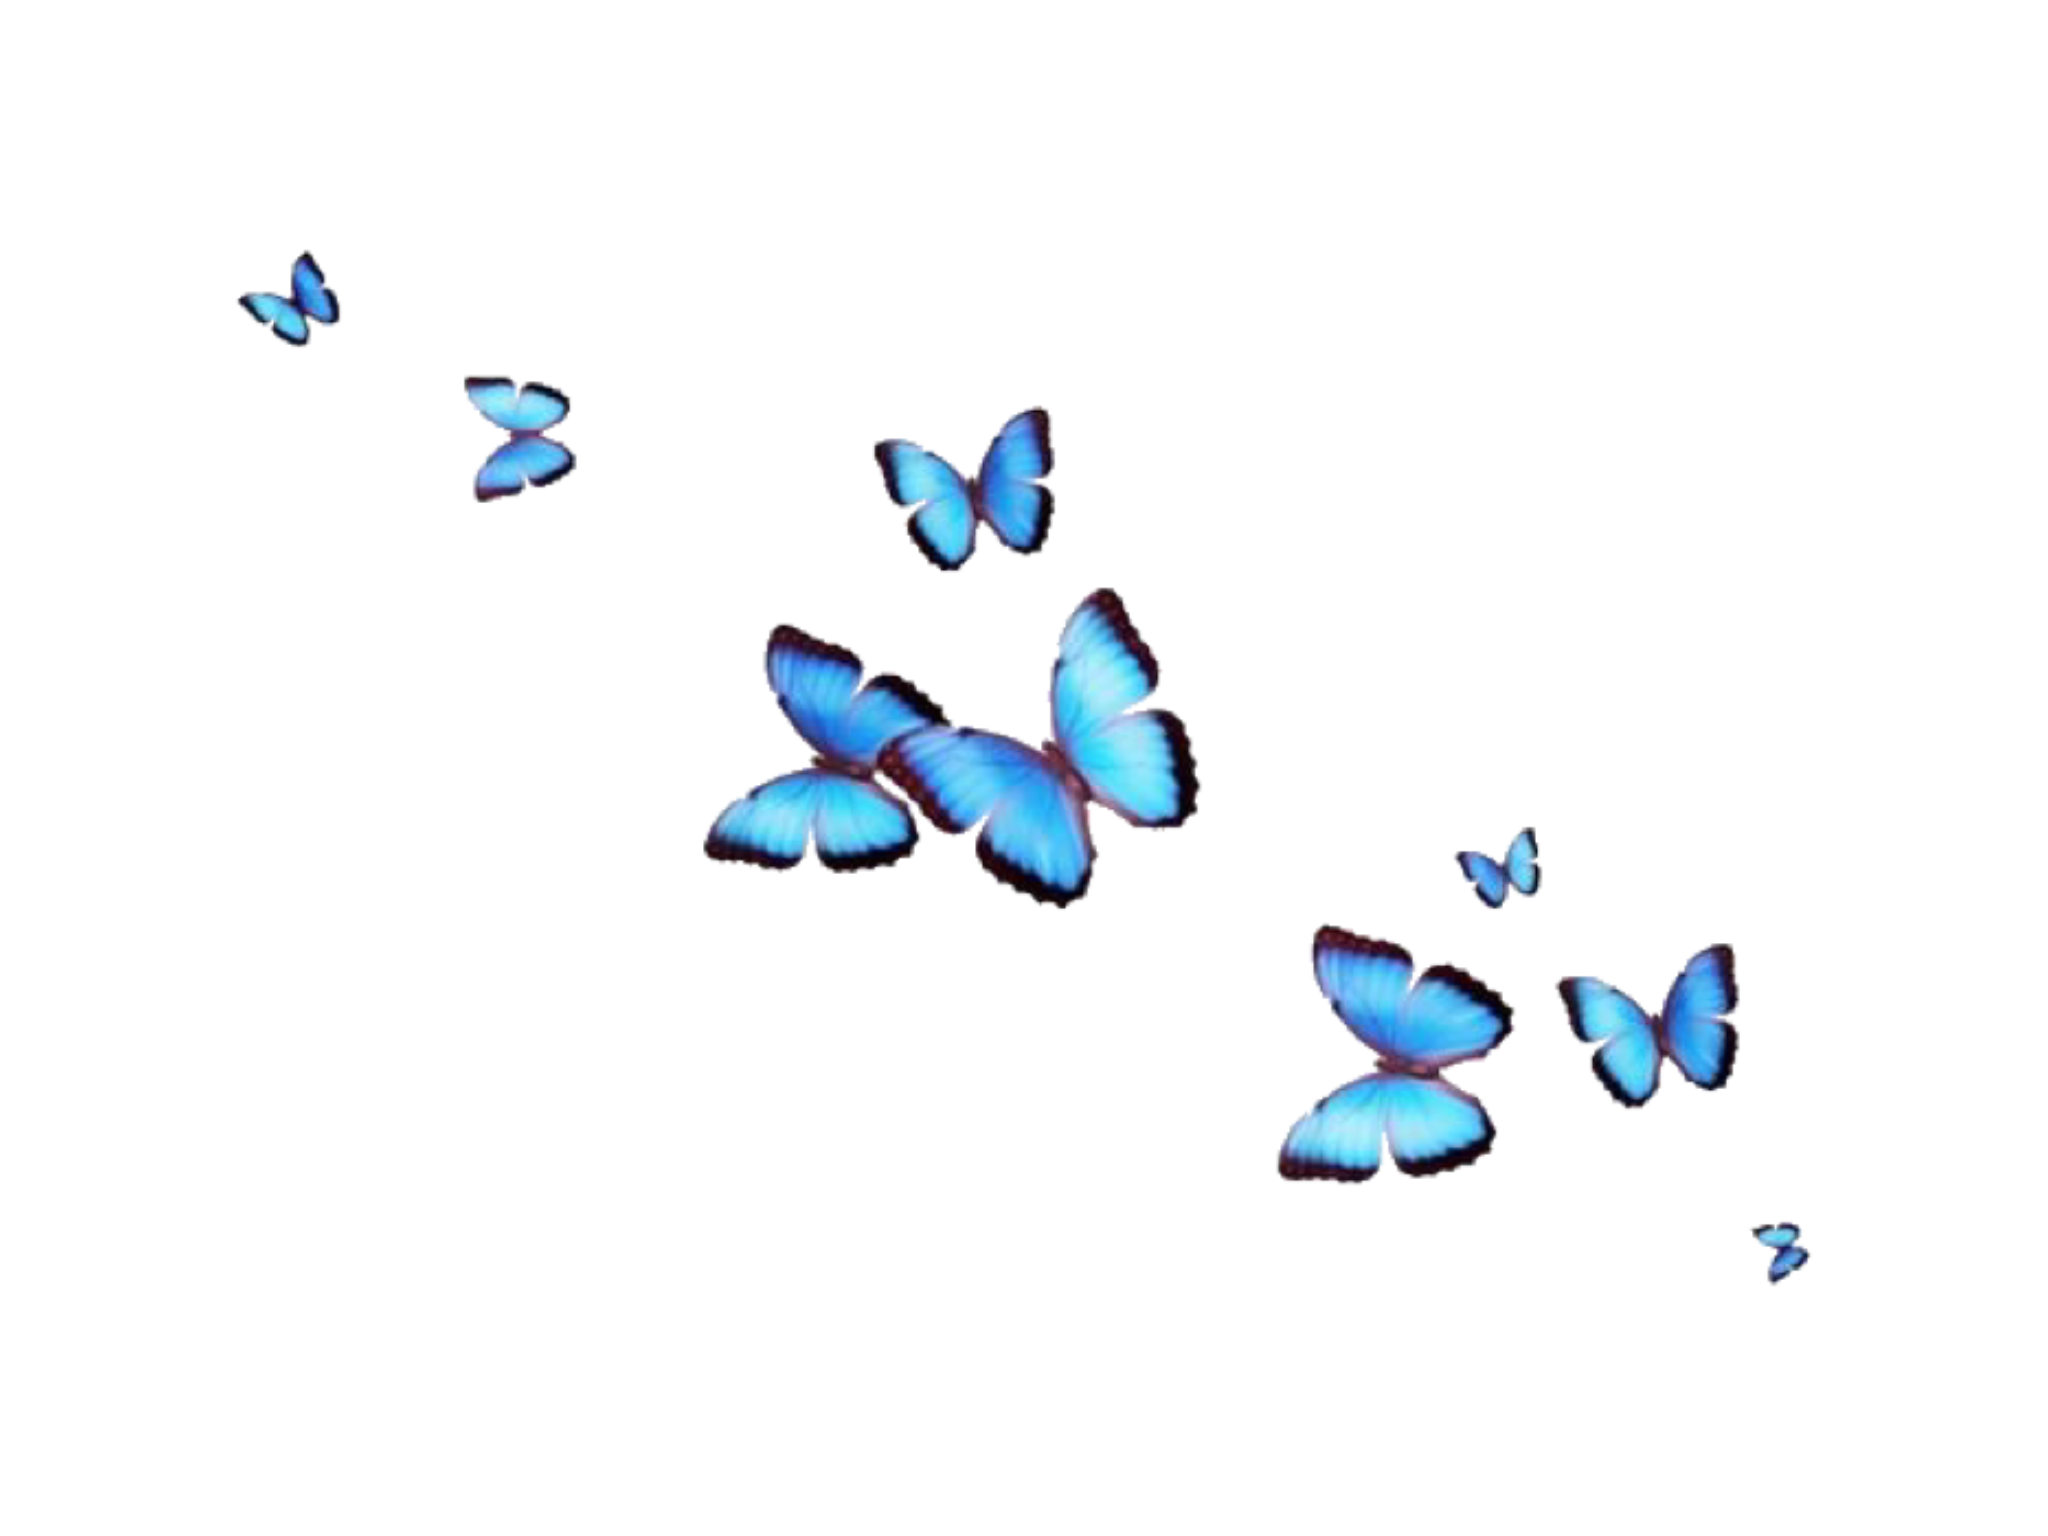 Aesthetic Butterfly PNG Images Transparent Background | PNG Play